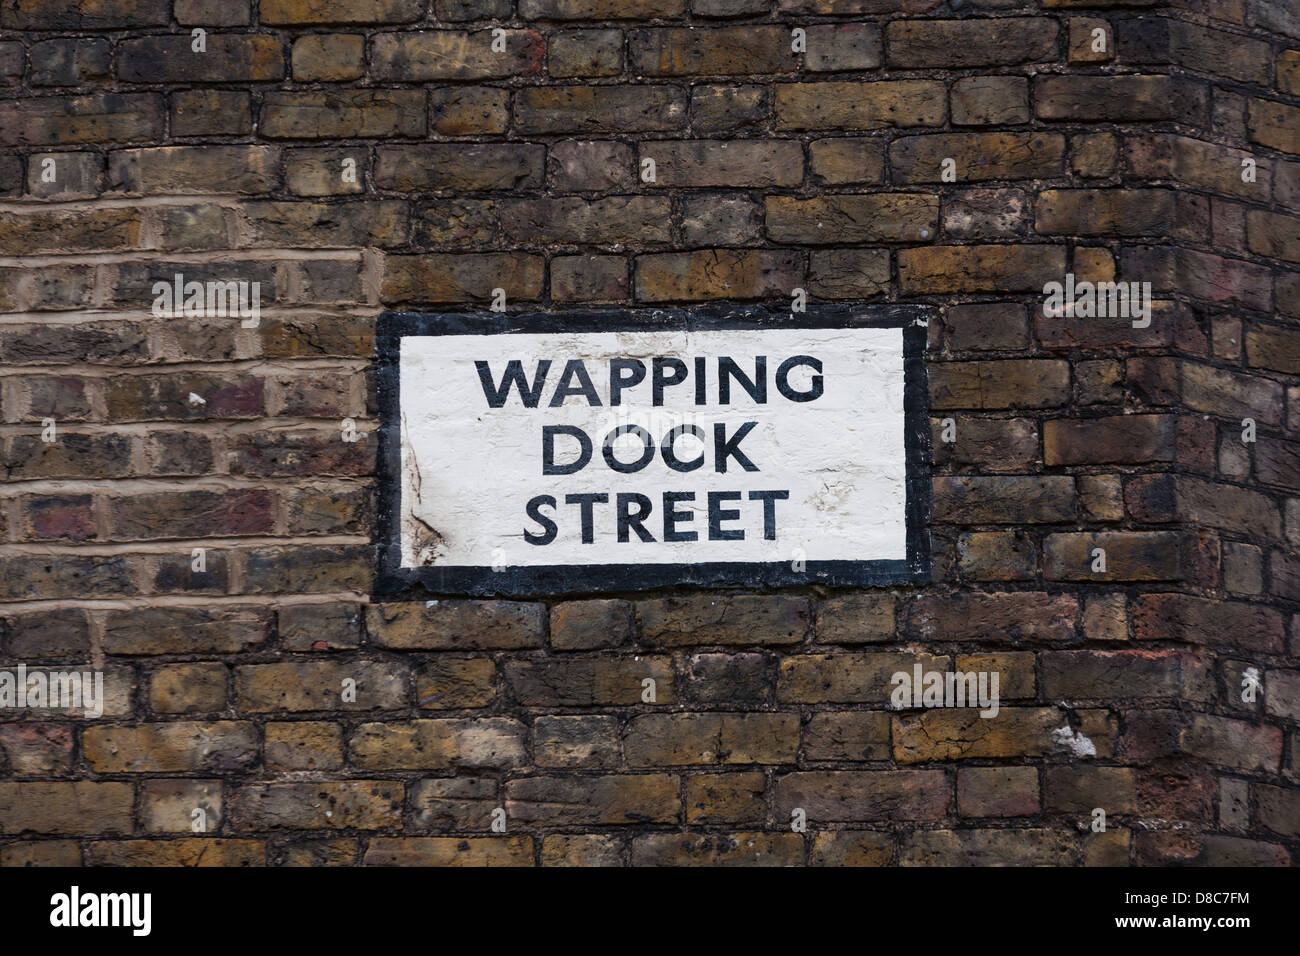 Old street sign on brick wall in Wapping Dock Street, east London. Stock Photo